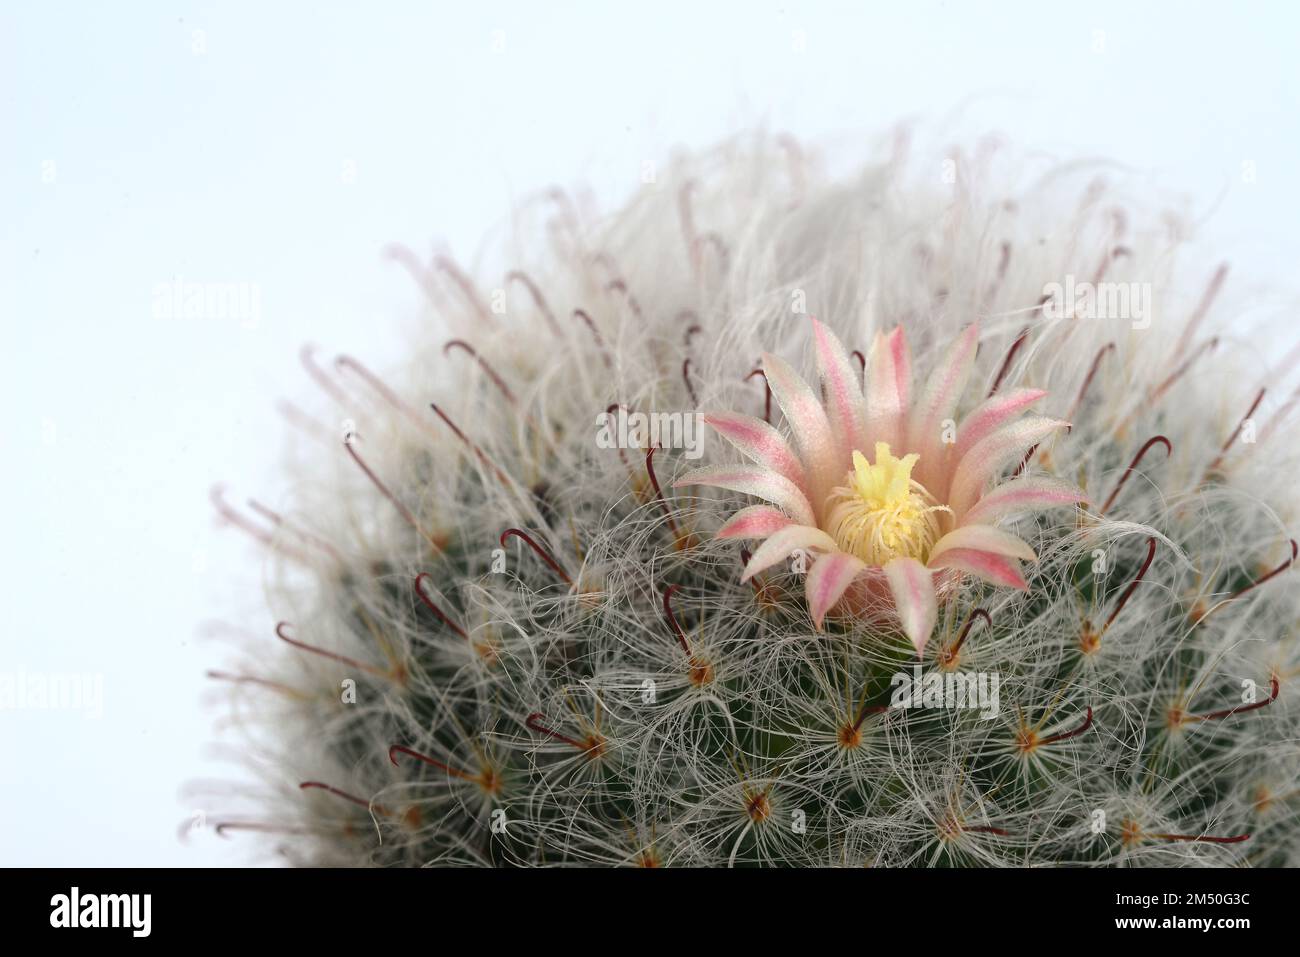 Mammillaria bocasana cv. multilanata is a selected cultivars densely covered by white woolly hairs similar to Mammillaria bocasana cv. It is commonly Stock Photo